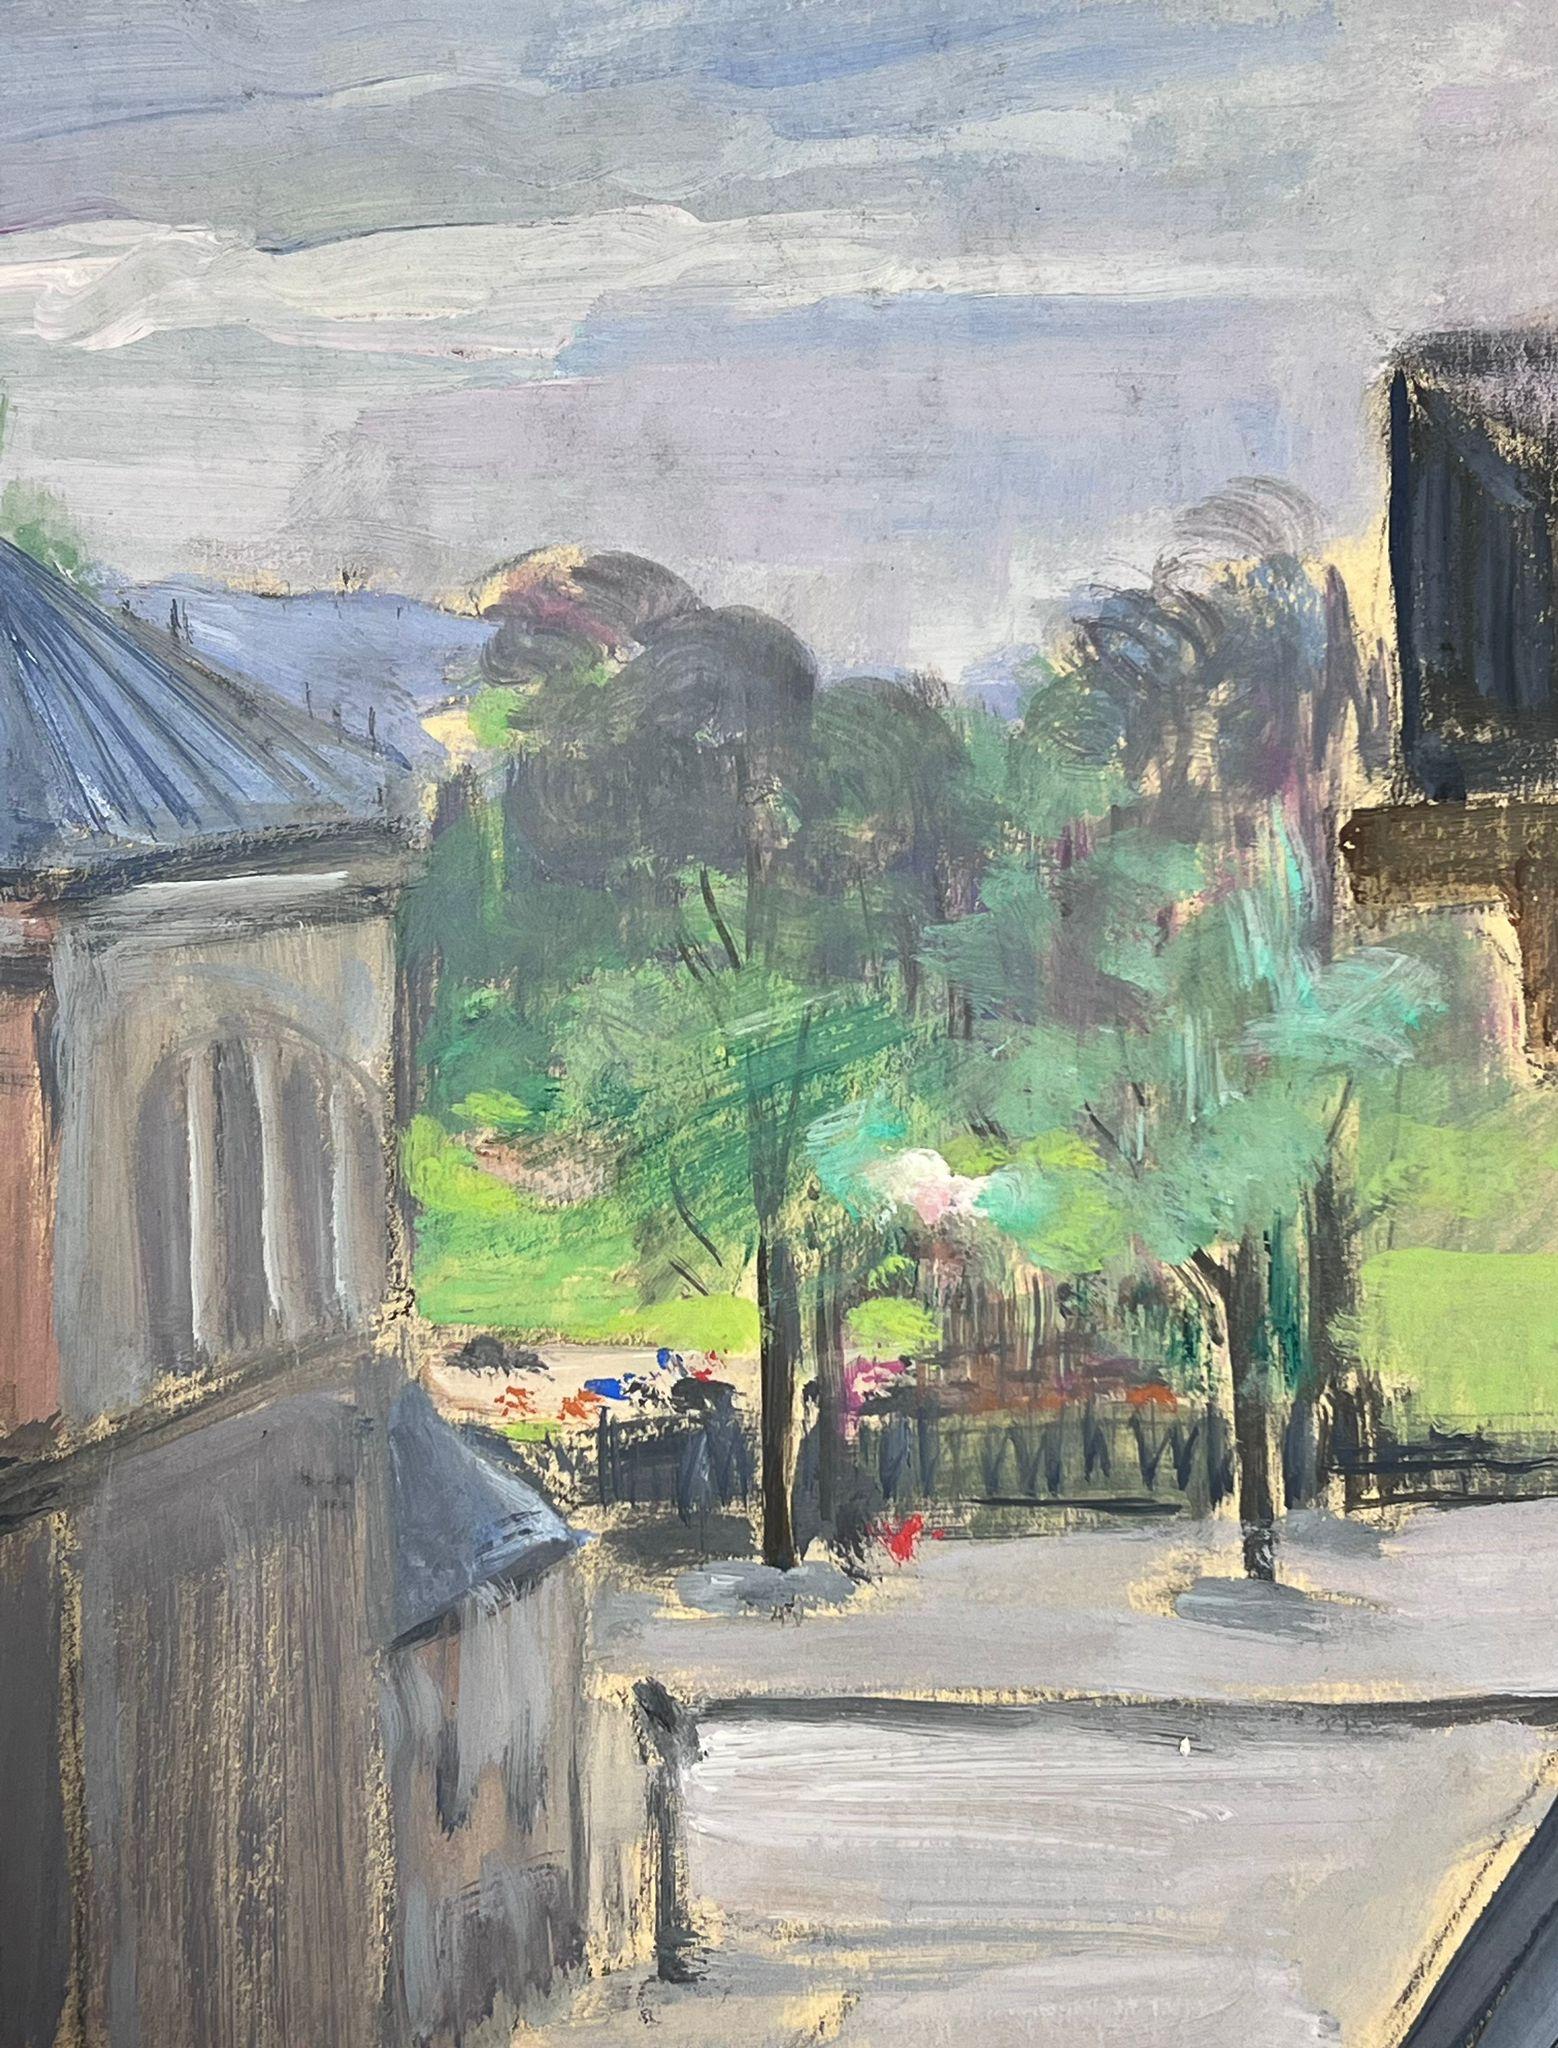 French Landscape
by Louise Alix, French 1950's Impressionist 
gouache on artist paper, unframed
painting: 9.75 x 9.75 inches
provenance: from a large private collection of this artists work in Northern France
condition: original, good and sound